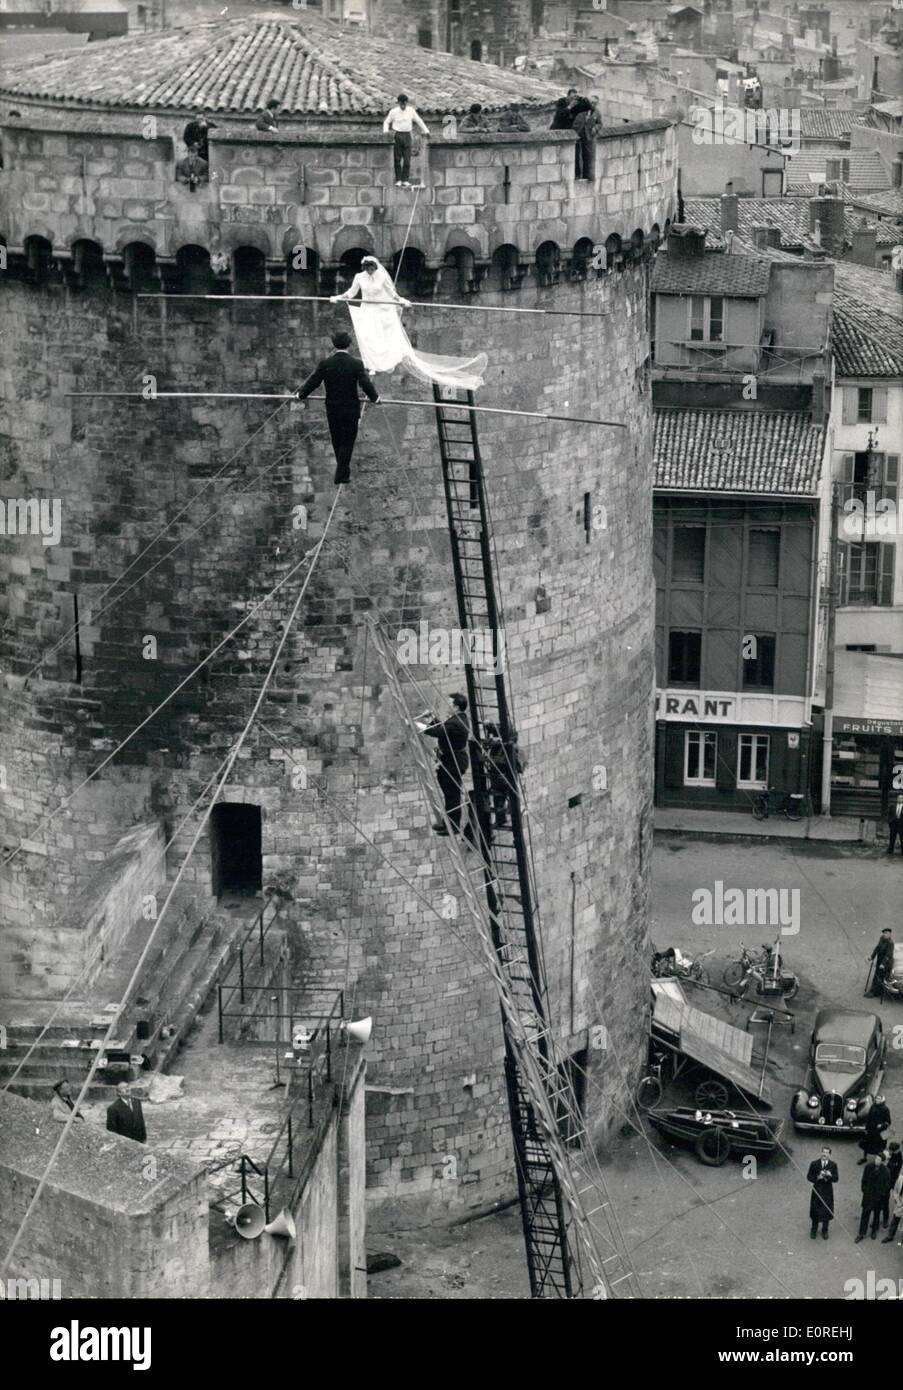 Mar. 03, 1959 - Wedding On A Tight Rope: A couple of tight rope acrobats, Roland Schmidt, 19n and Francine Pary, 19, from La Rochelle, near Bordeaux, were married on a tight rope in the la Rochelle harbour yesterday. The rope was fixed between two ancient towers 60 feet above the ground. A well-known cabaret singer, Claude Bejac, deputising for the mayor of the free community of montmartre, united the couple while standing on a firemen's ladder. photo shows. Bride and bridegroom being married on the tight rope. Below, on a ladder, Claude Bejac. Stock Photo